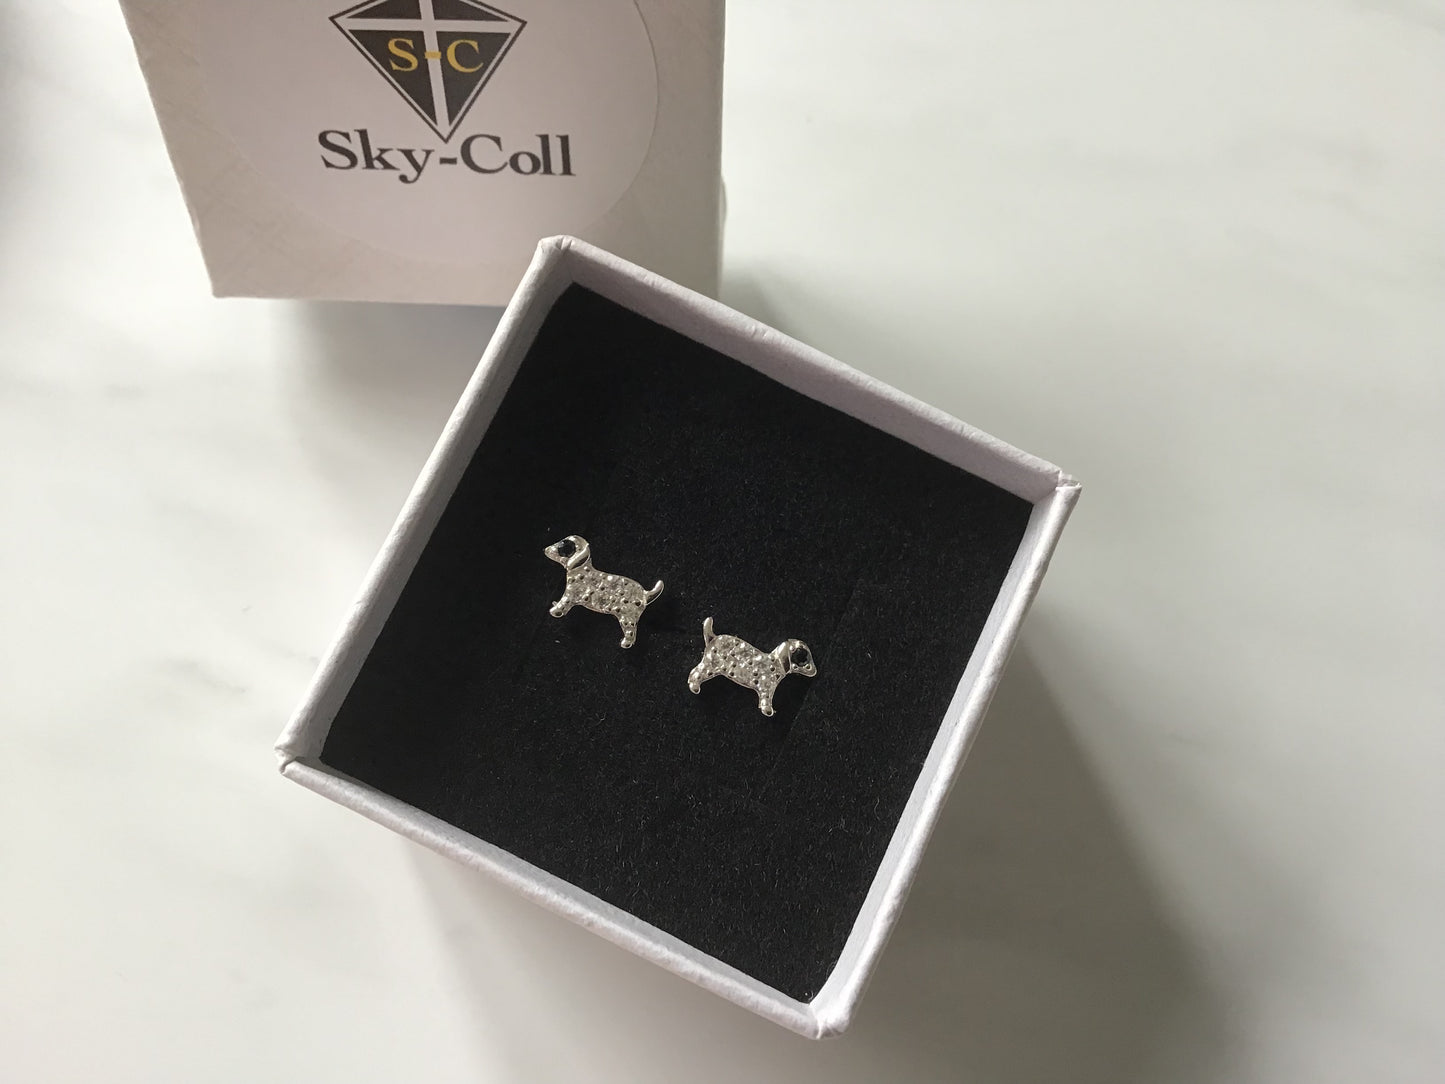 Genuine 925 Sterling Silver Pair of Dog Earrings with Sparkly CZ